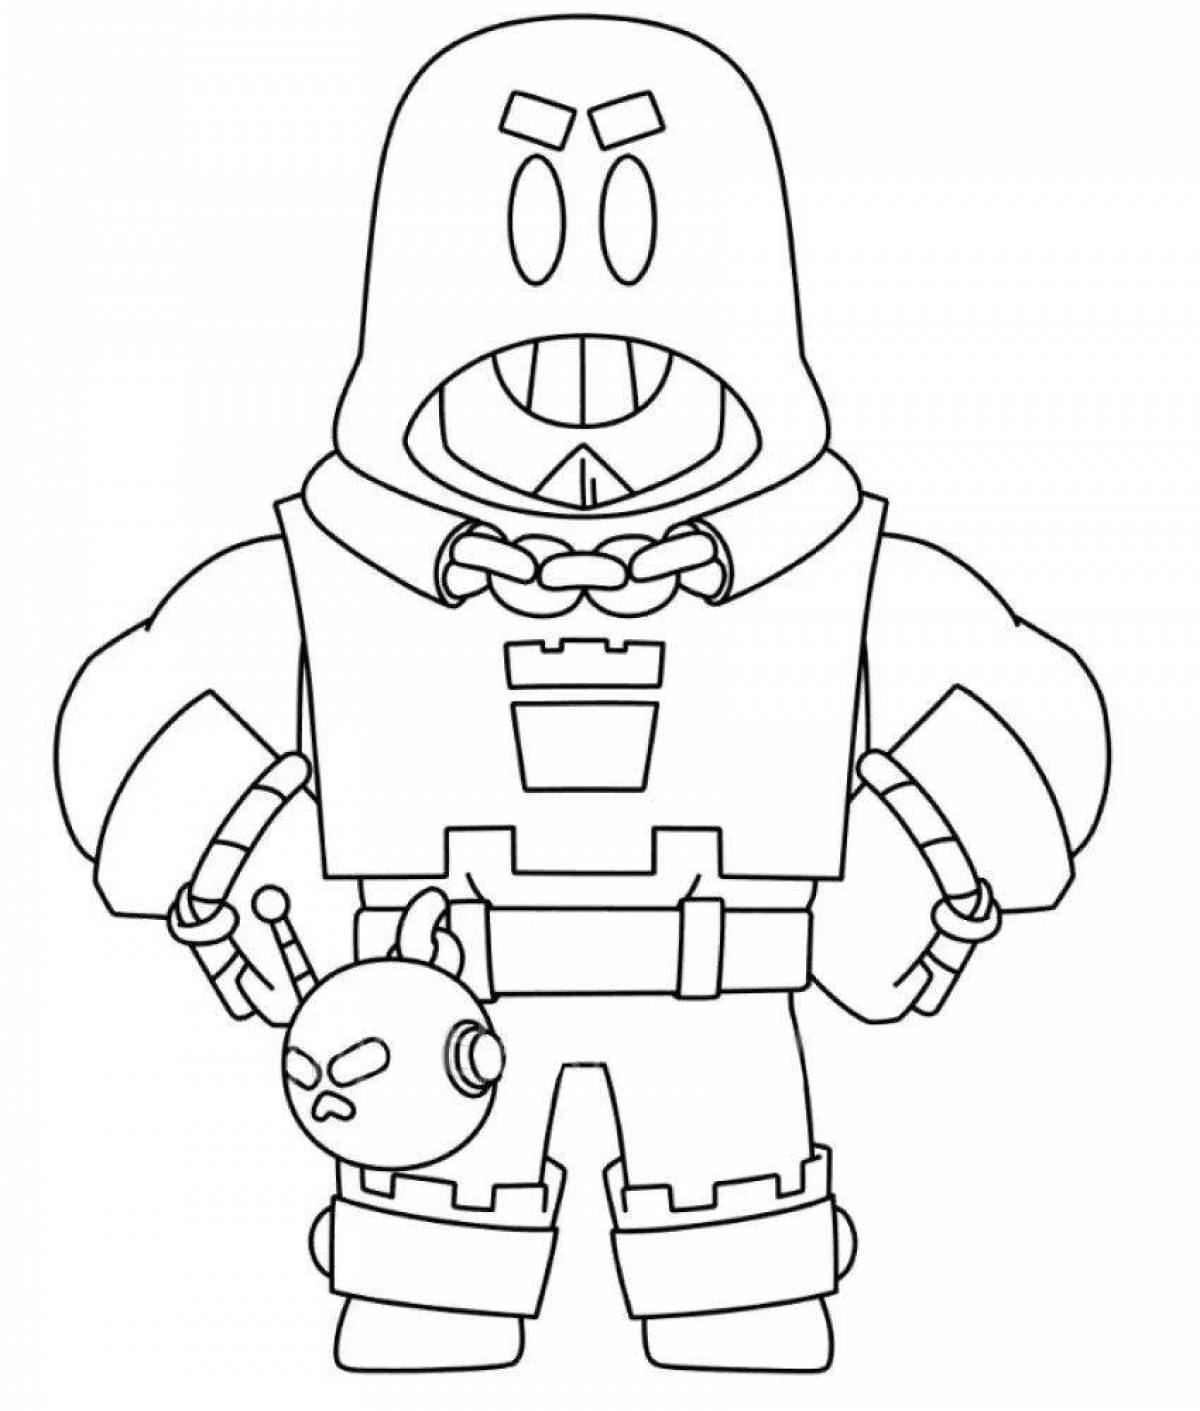 Radiant fighters brawl stars coloring page